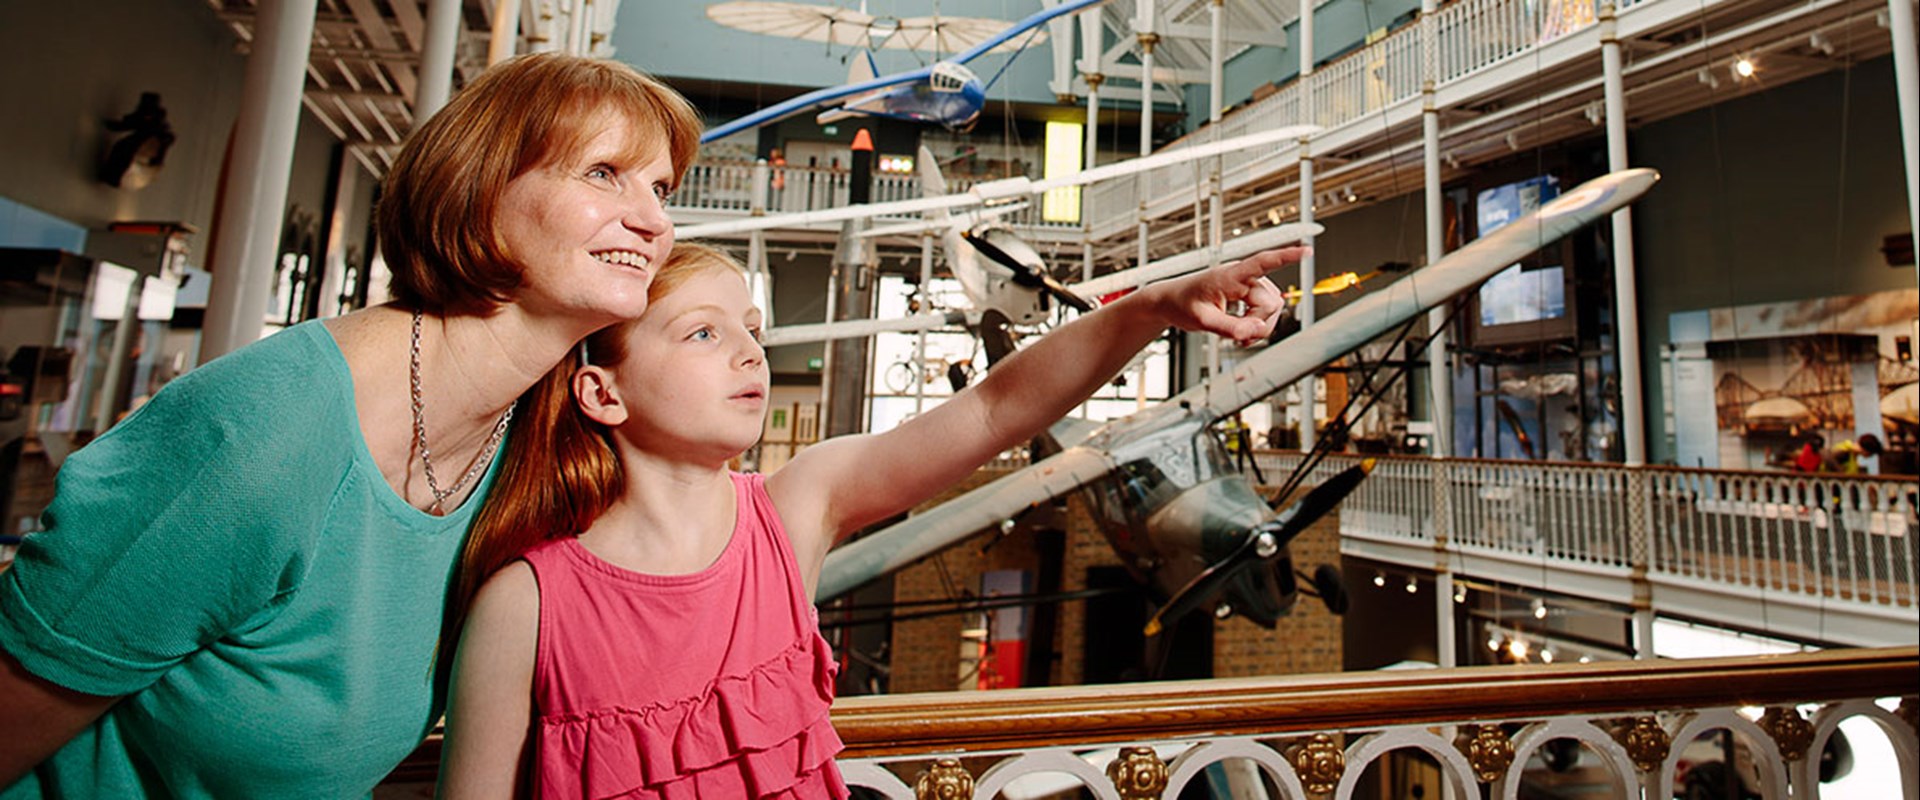 A woman and child stand on the balcony in front of different model airplanes hanging from the ceiling. The child points to something out of frame.